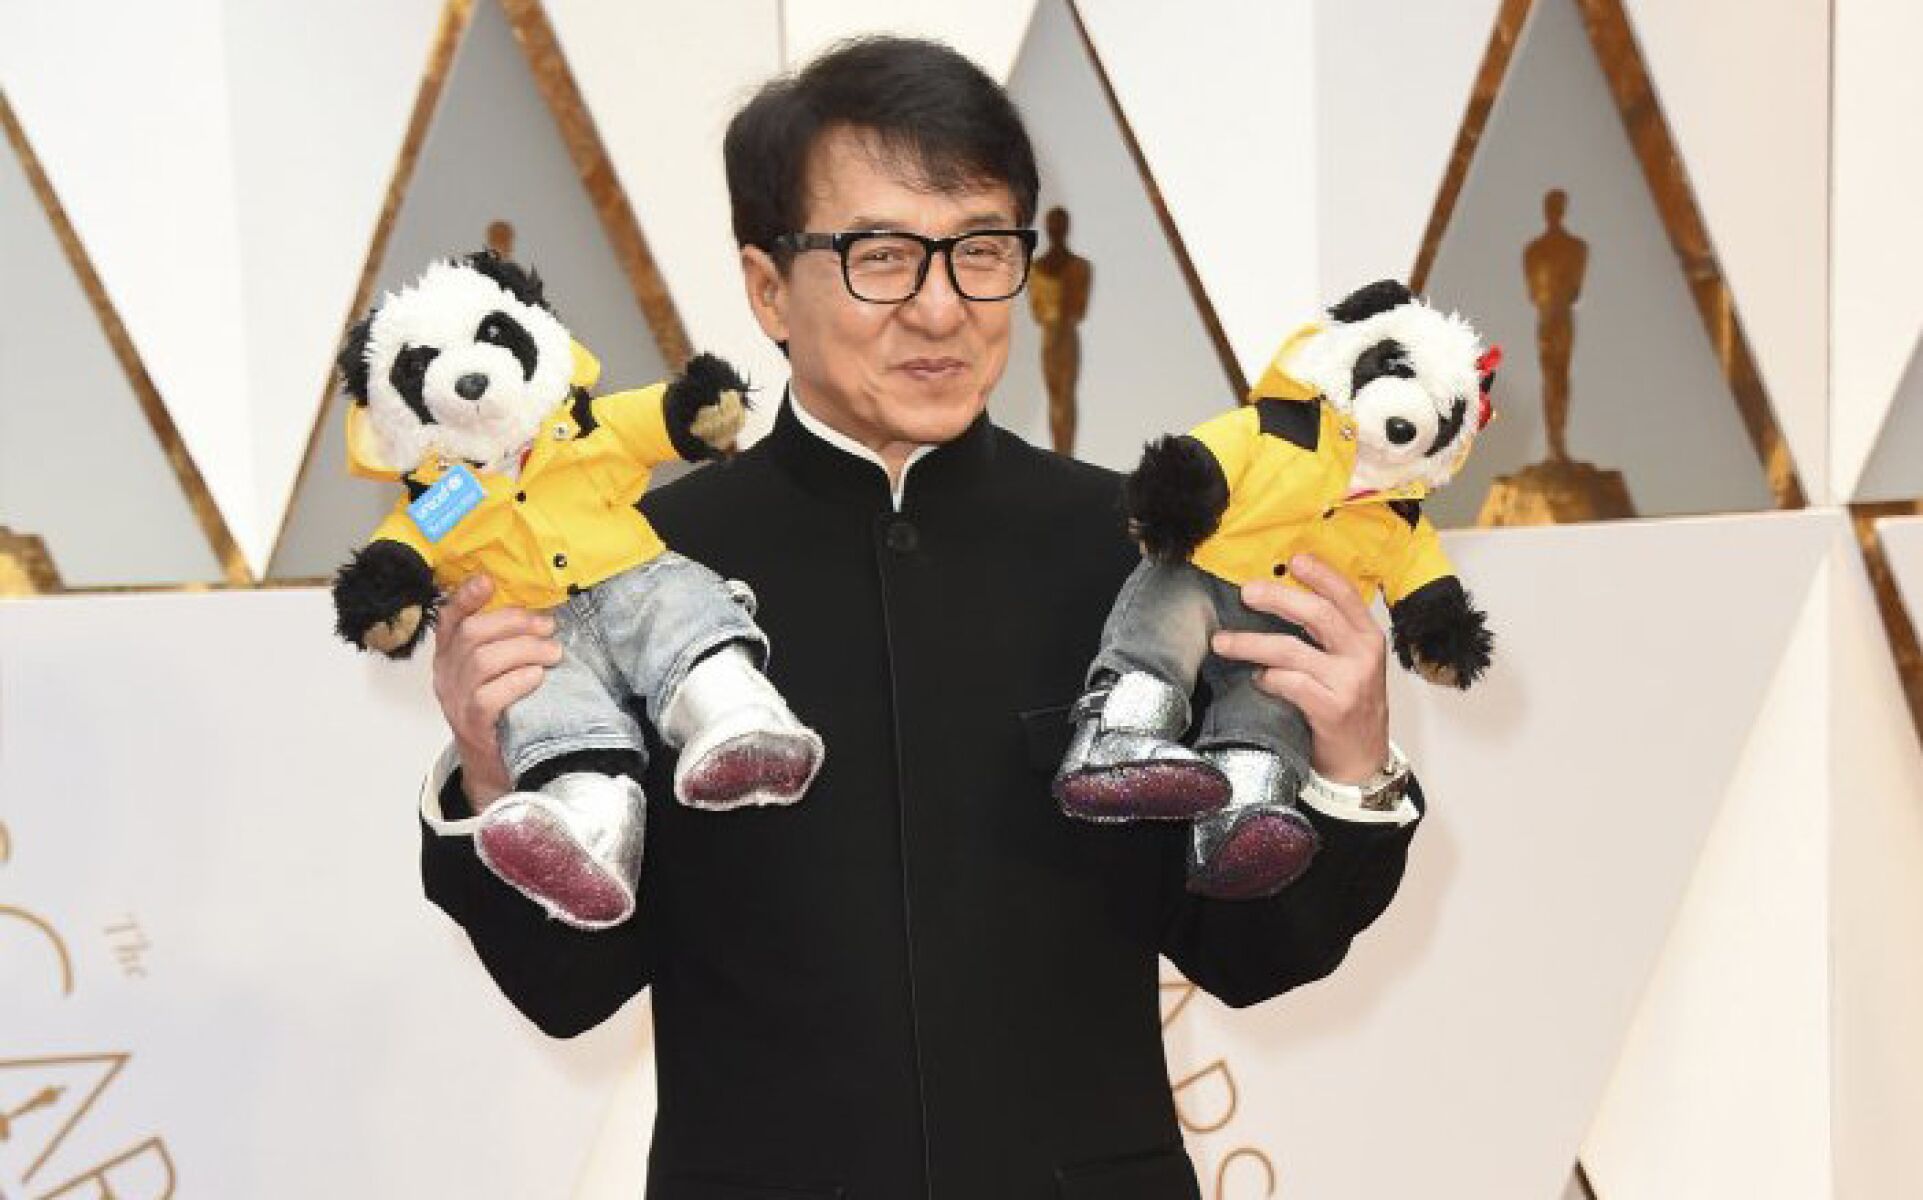 Jackie Chan arrives at the Oscars.